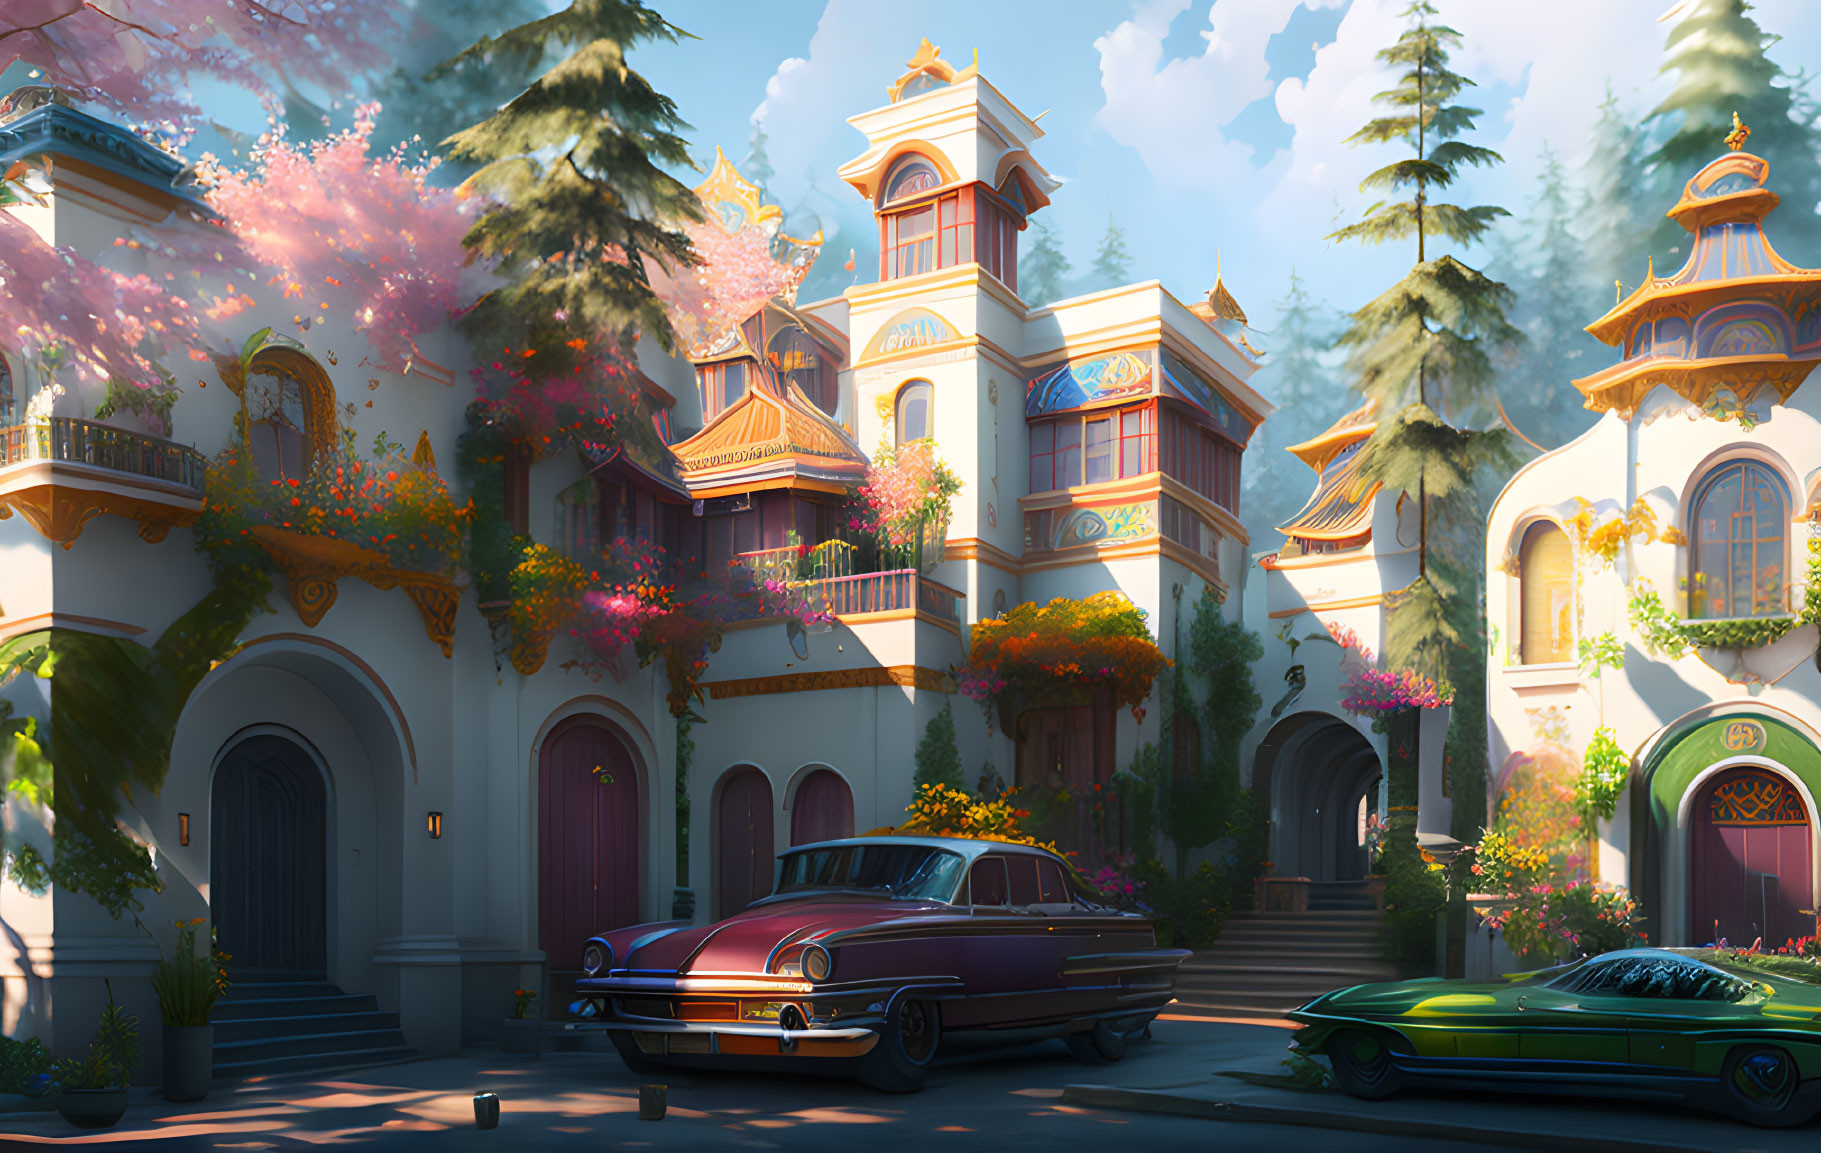 Colorful illustration of grand mansion with orange roofs, surrounded by trees and pink flowers.